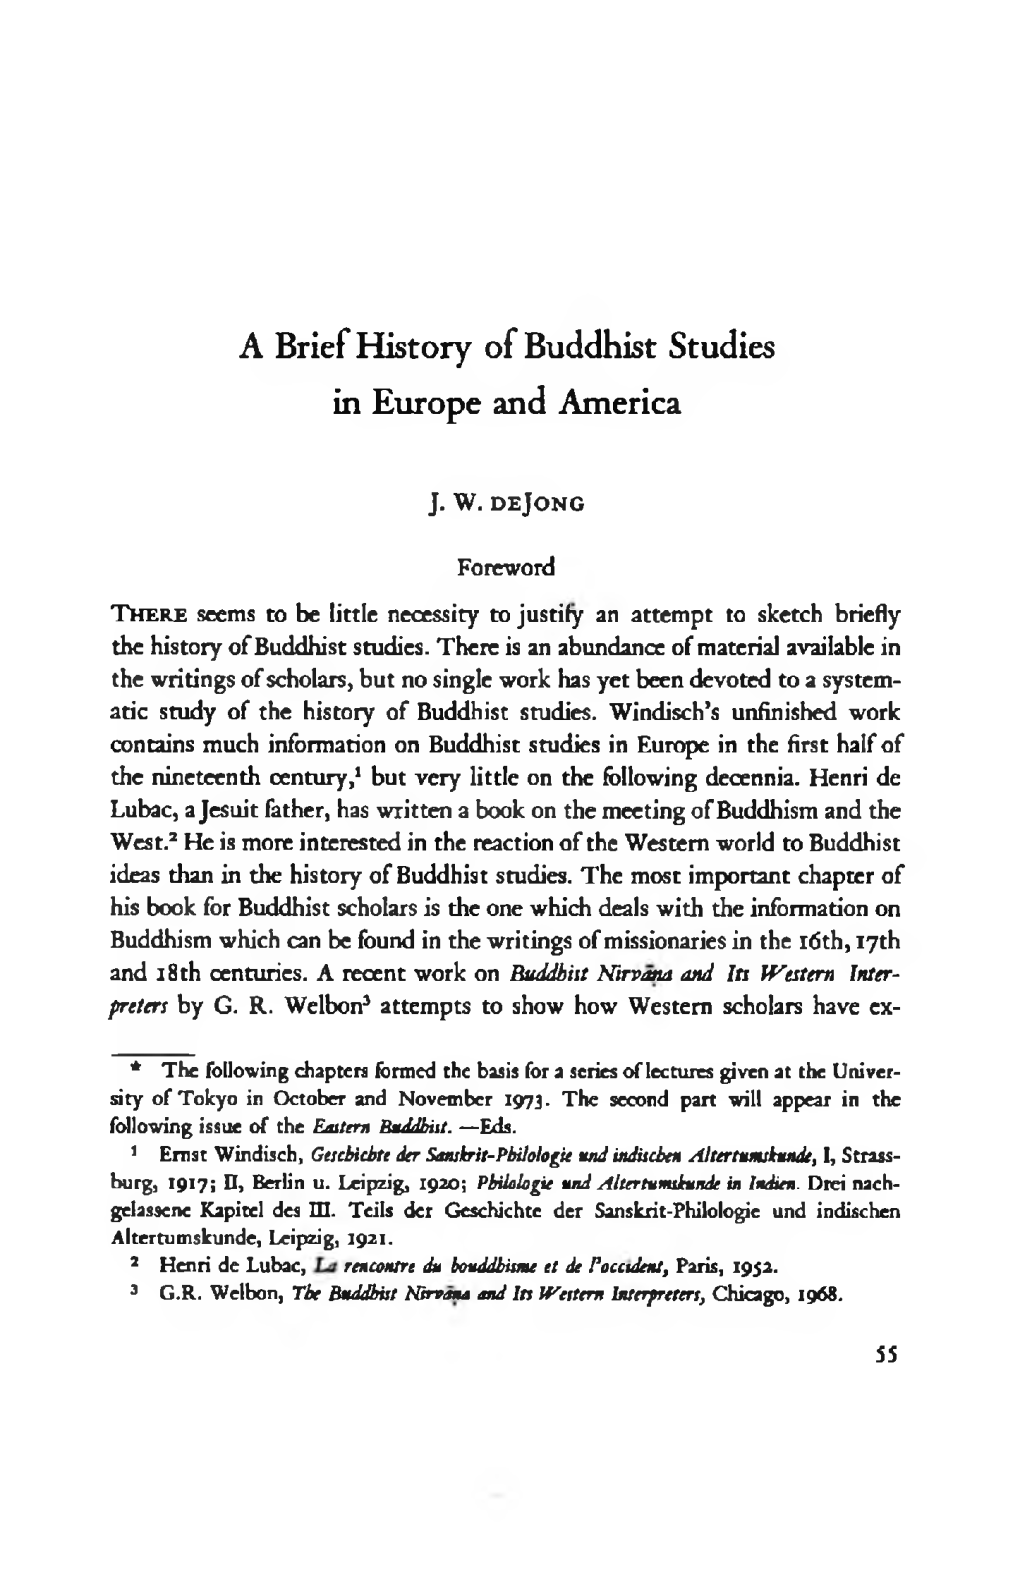 A Brief History of Buddhist Studies in Europe and America